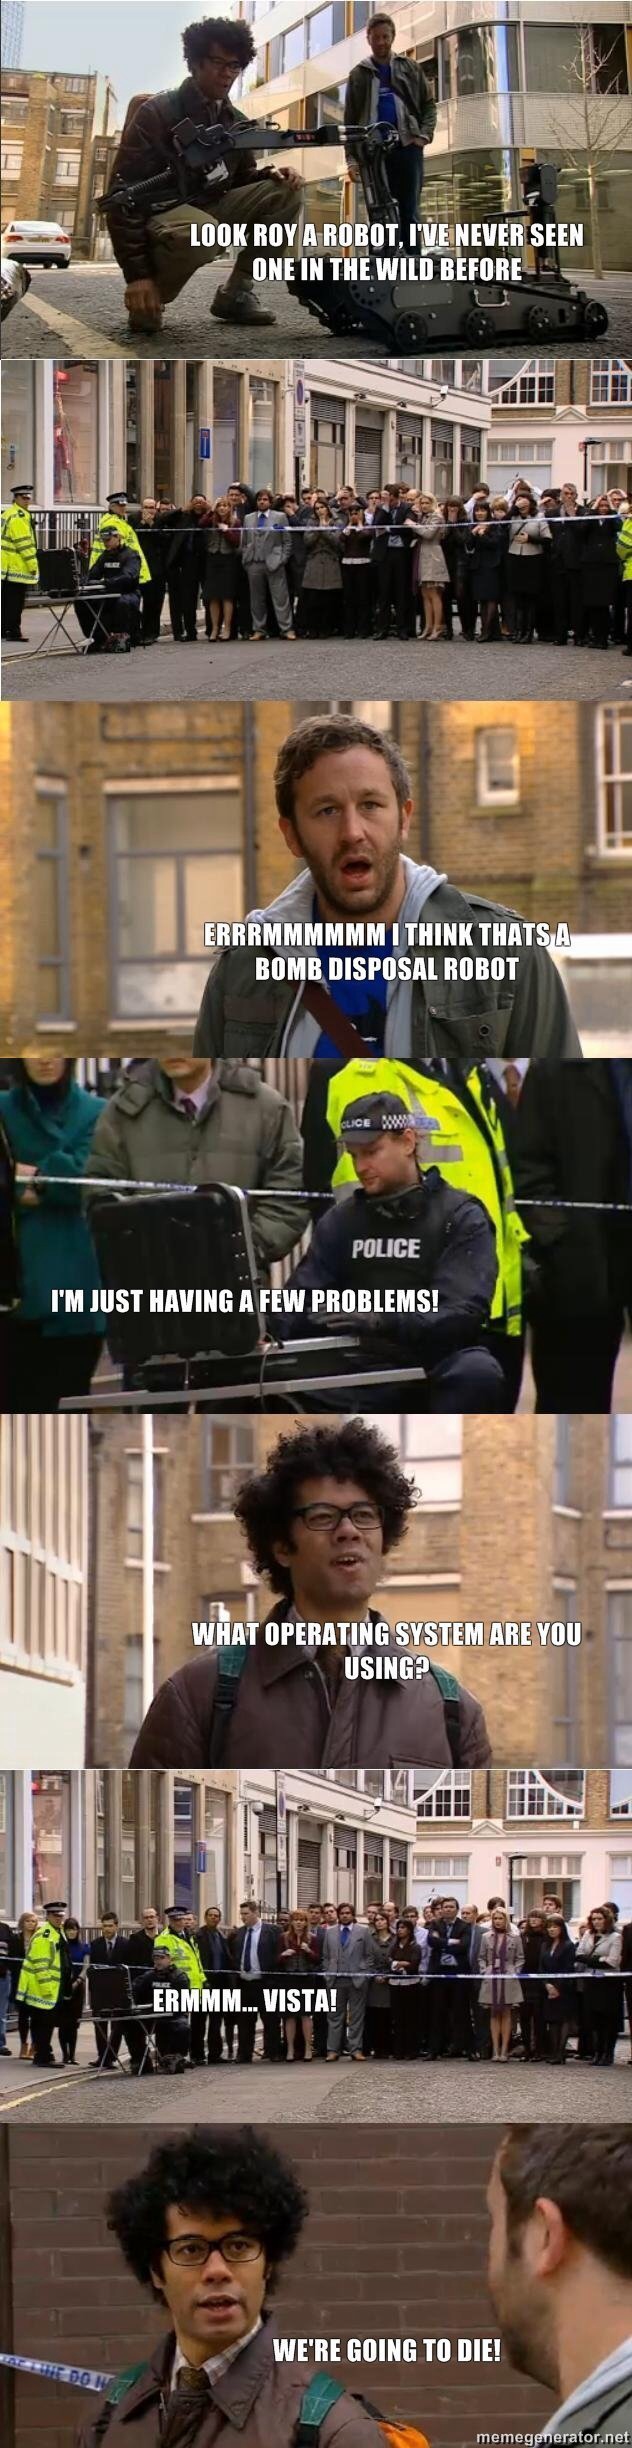 The IT crowd